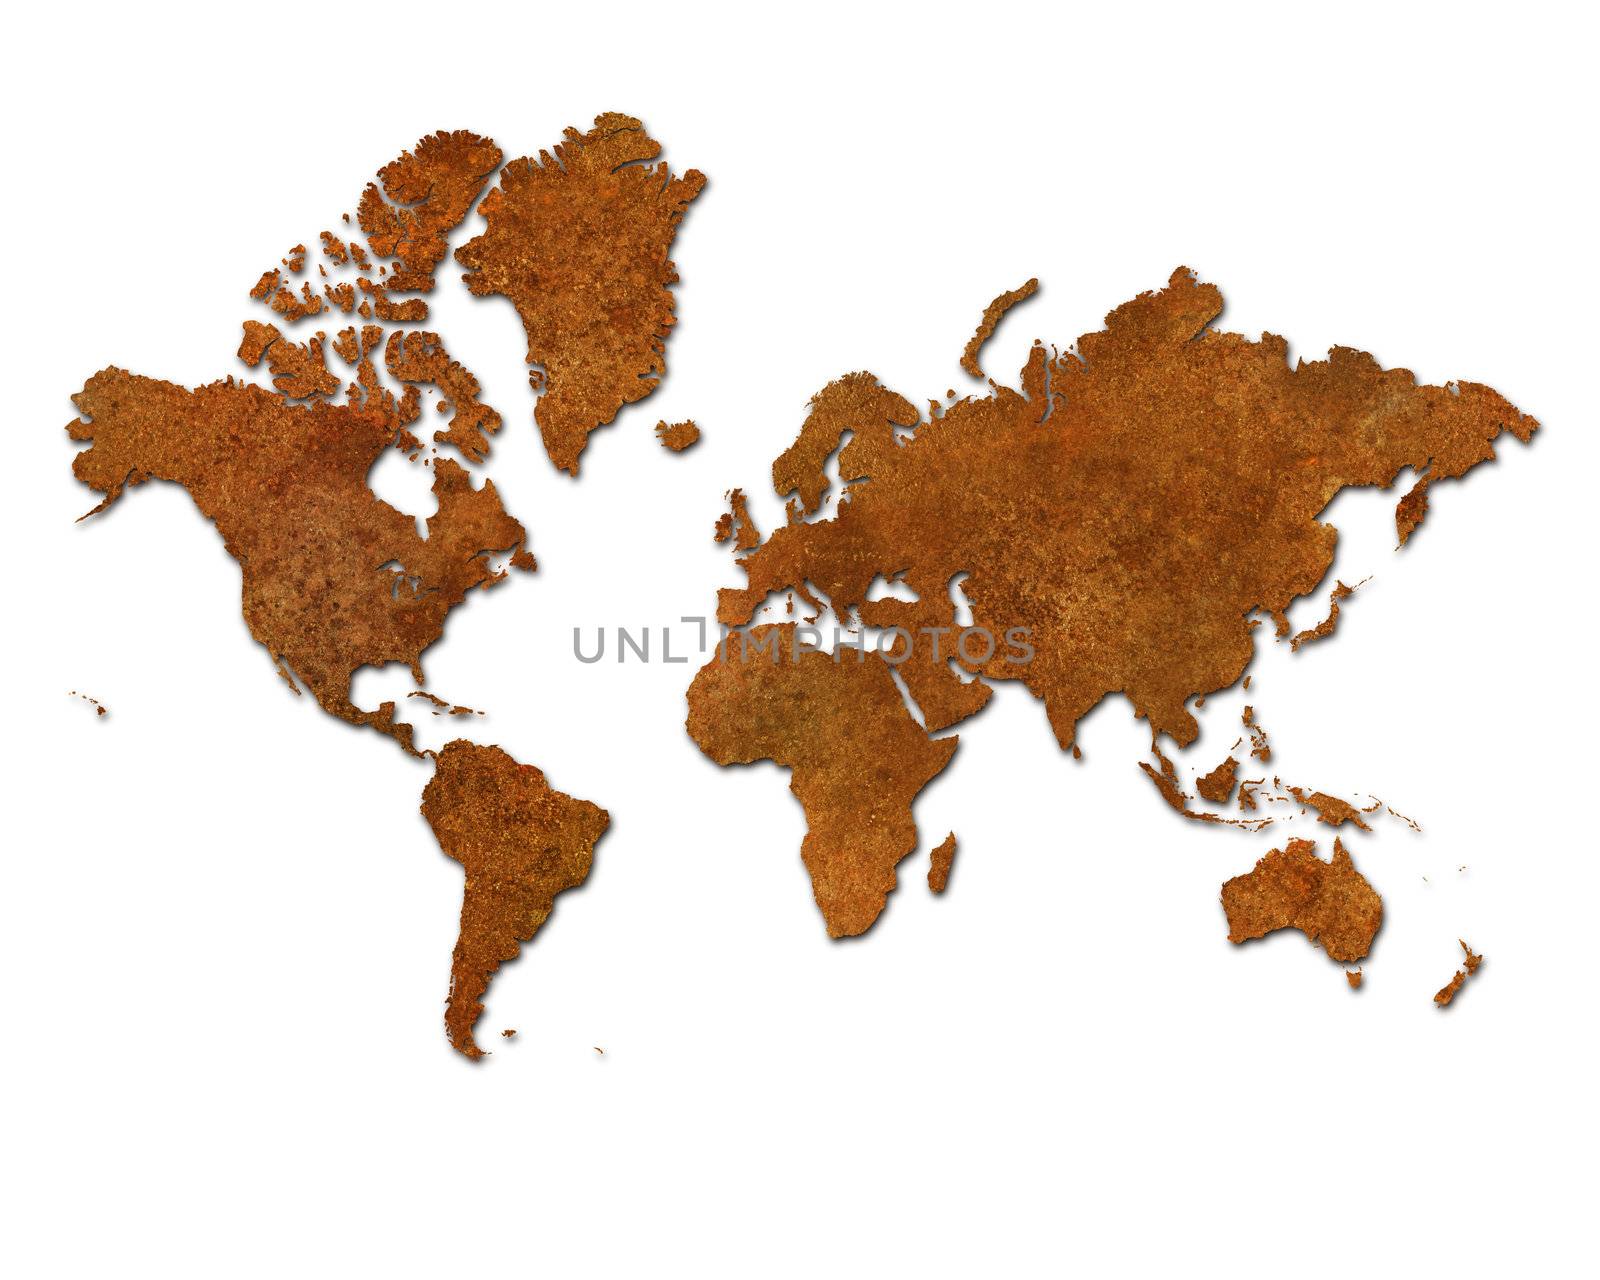 Global map with rusty metal continents on white by Balefire9